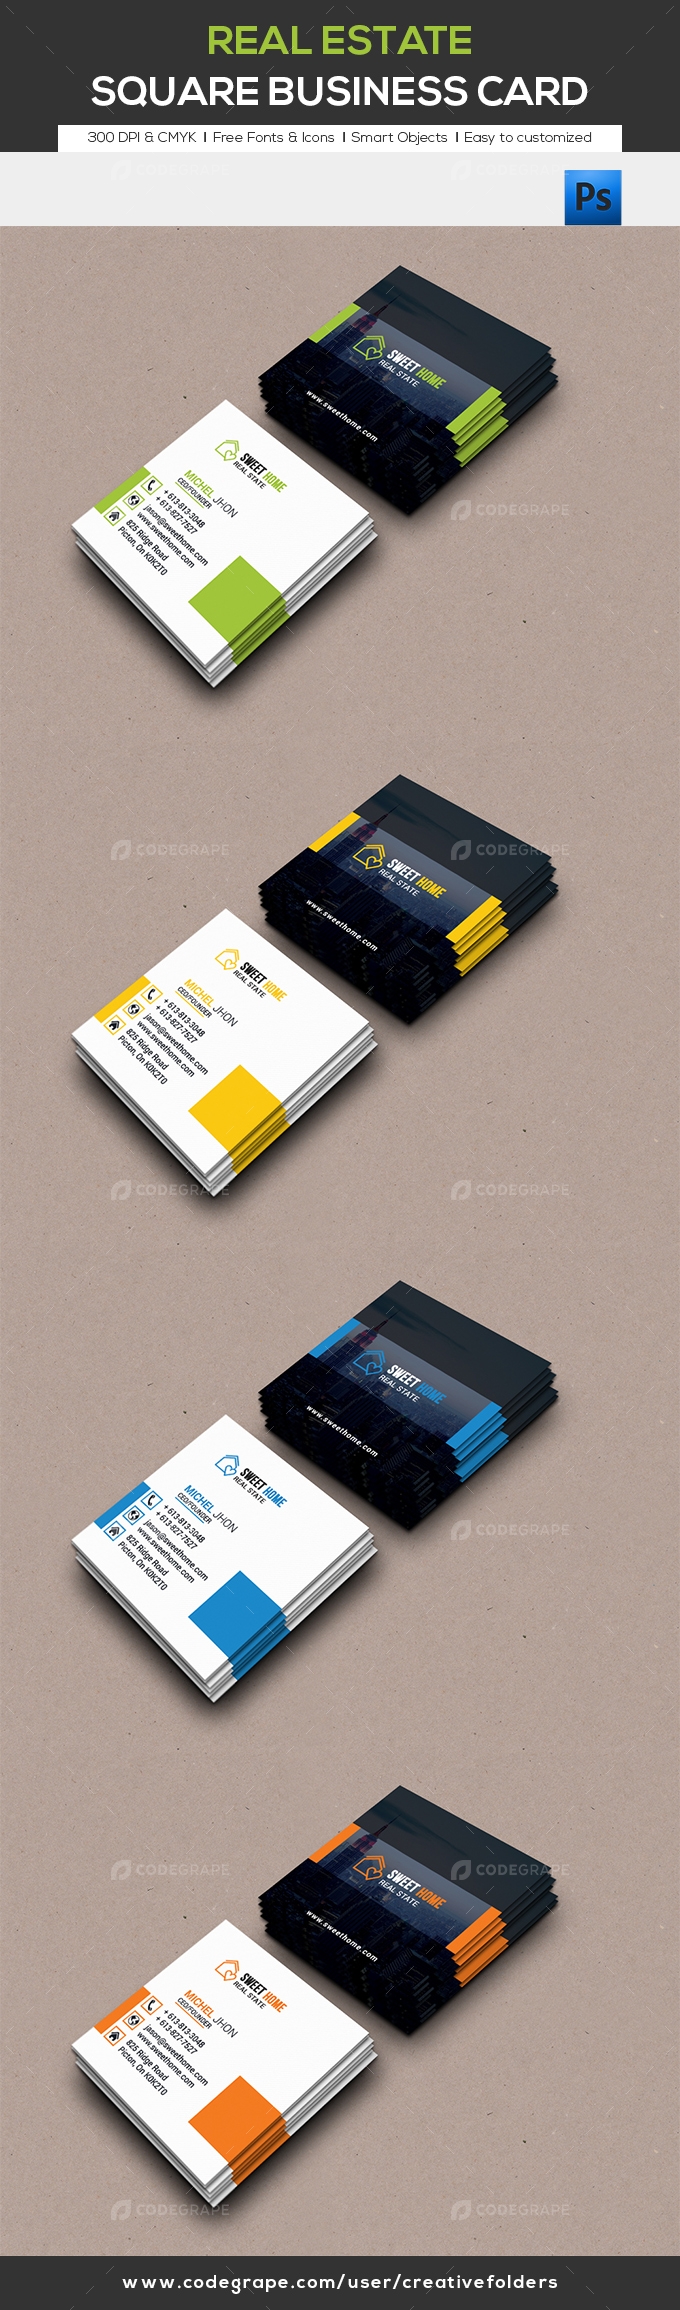 Corporate Square Business Card